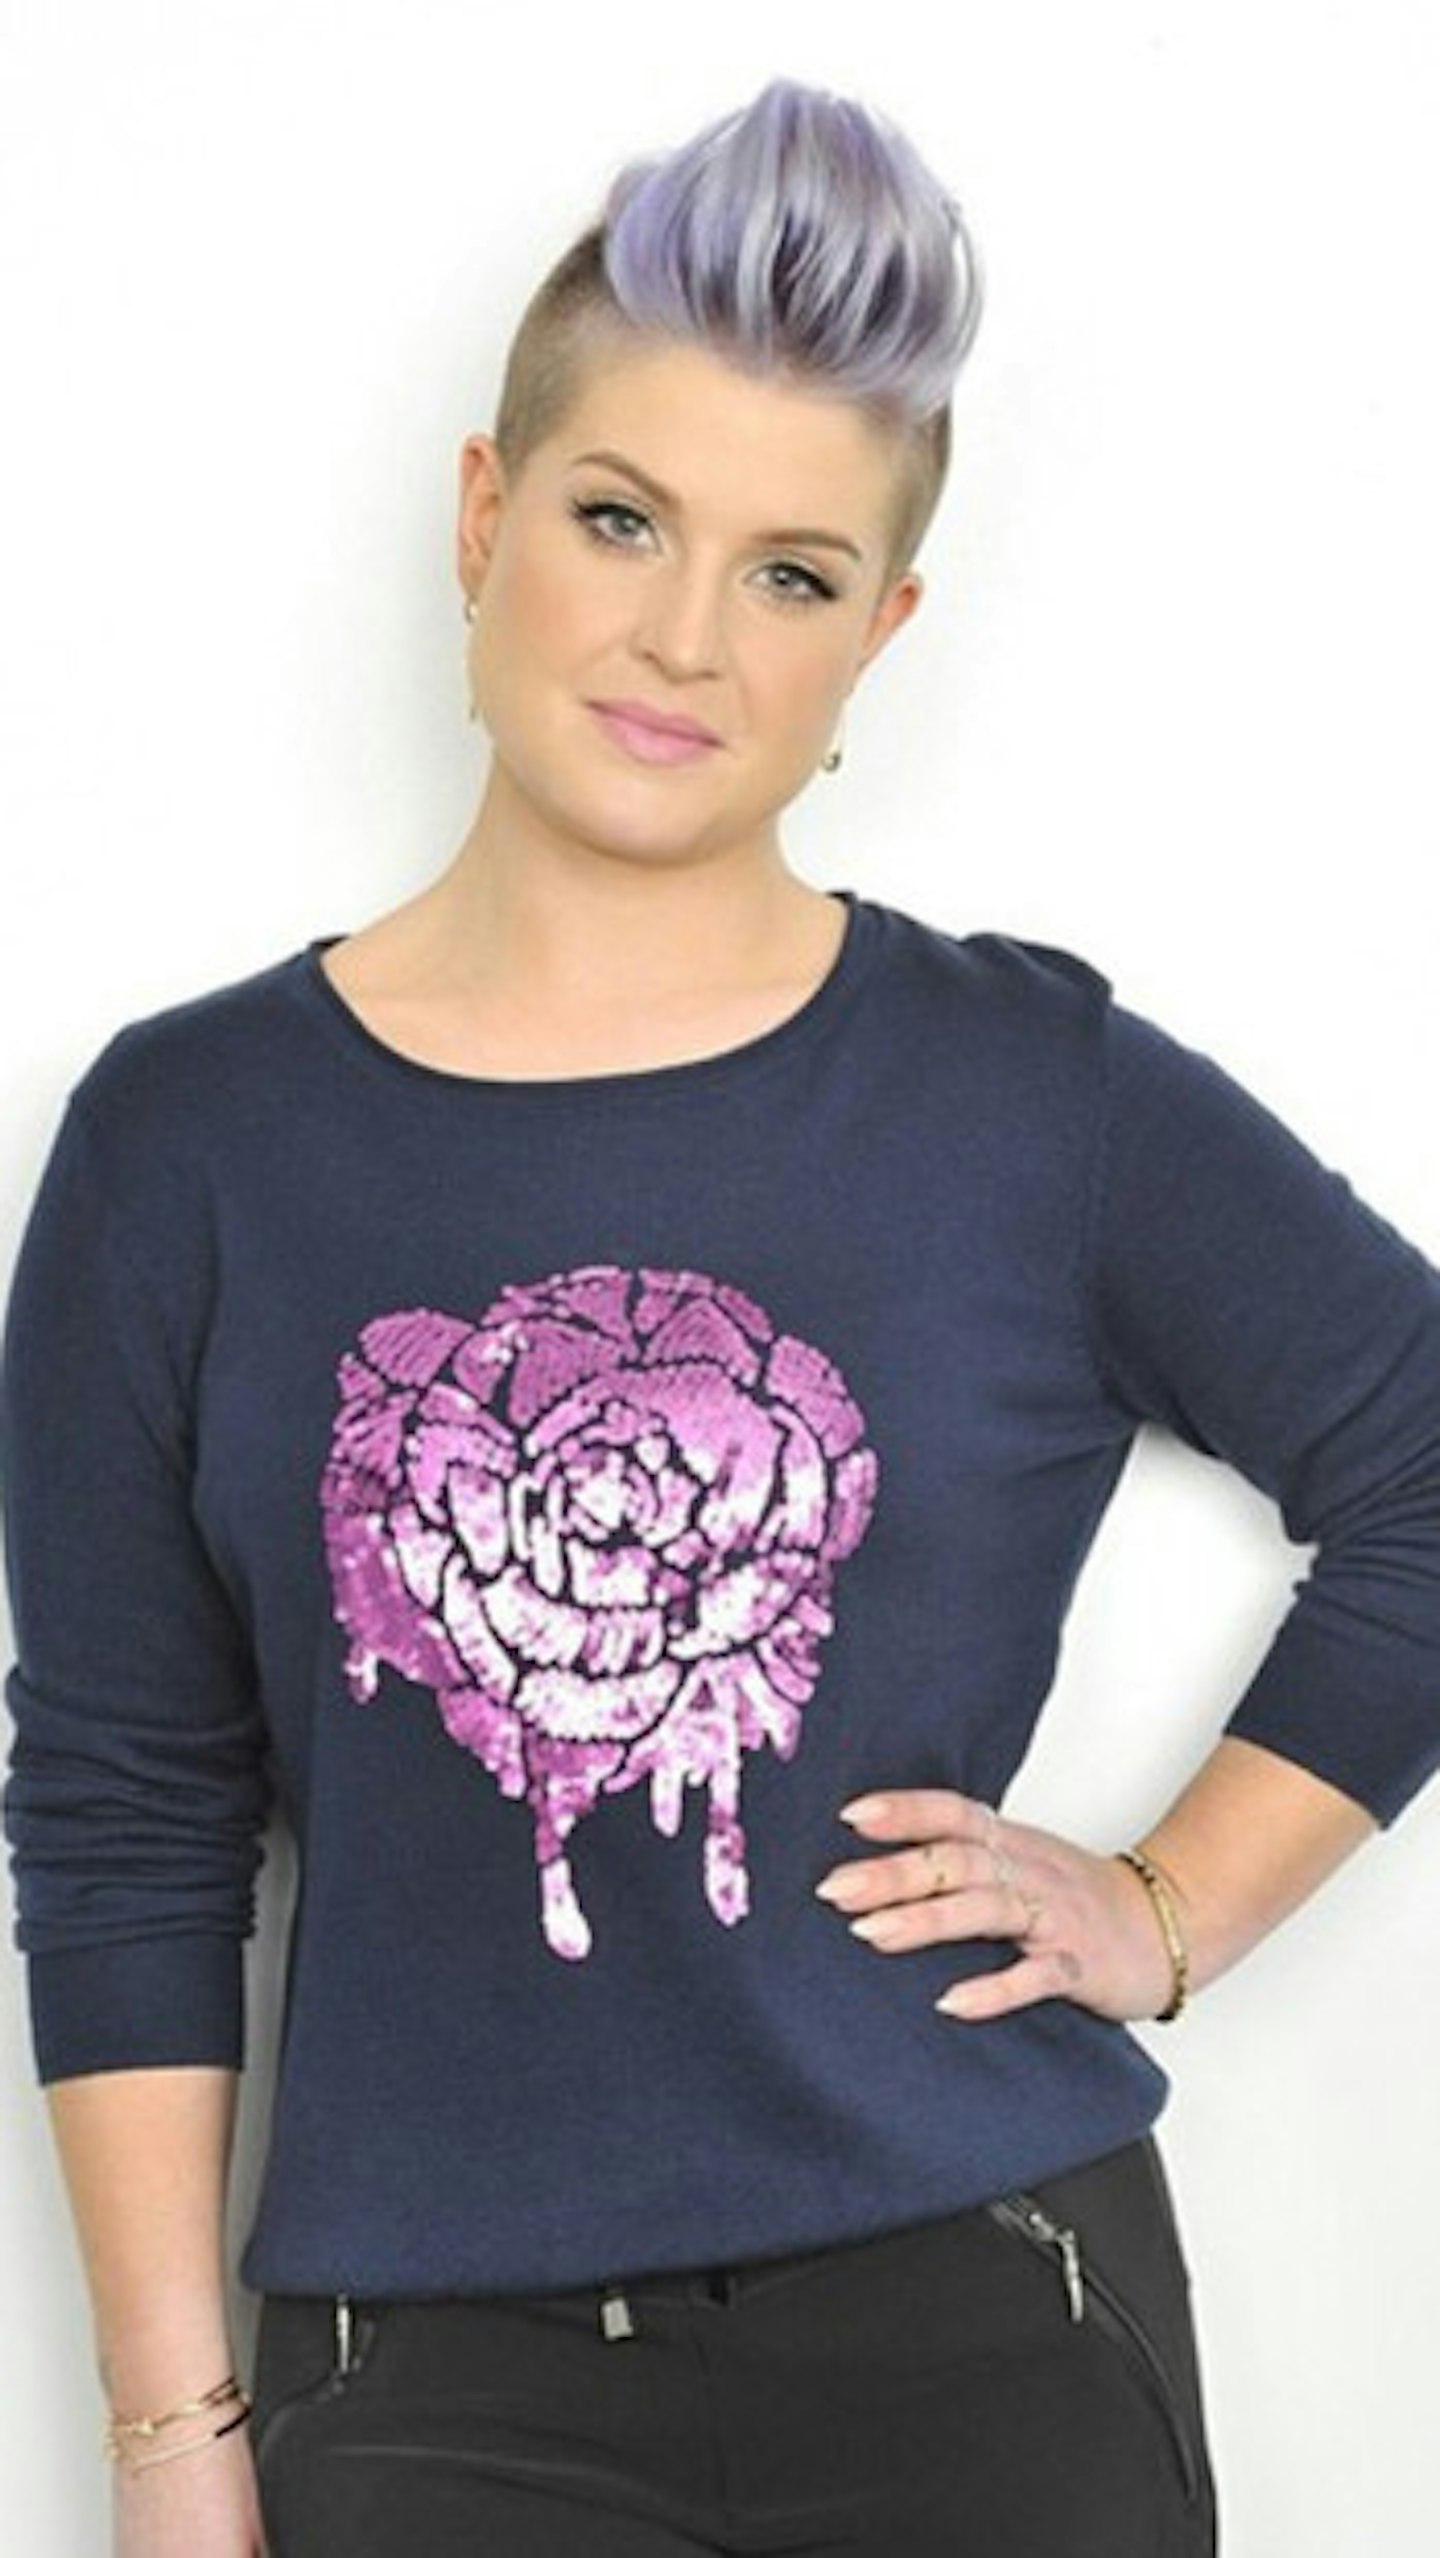 Influencer Sinead of 'Curvy Style' fame launches new line of